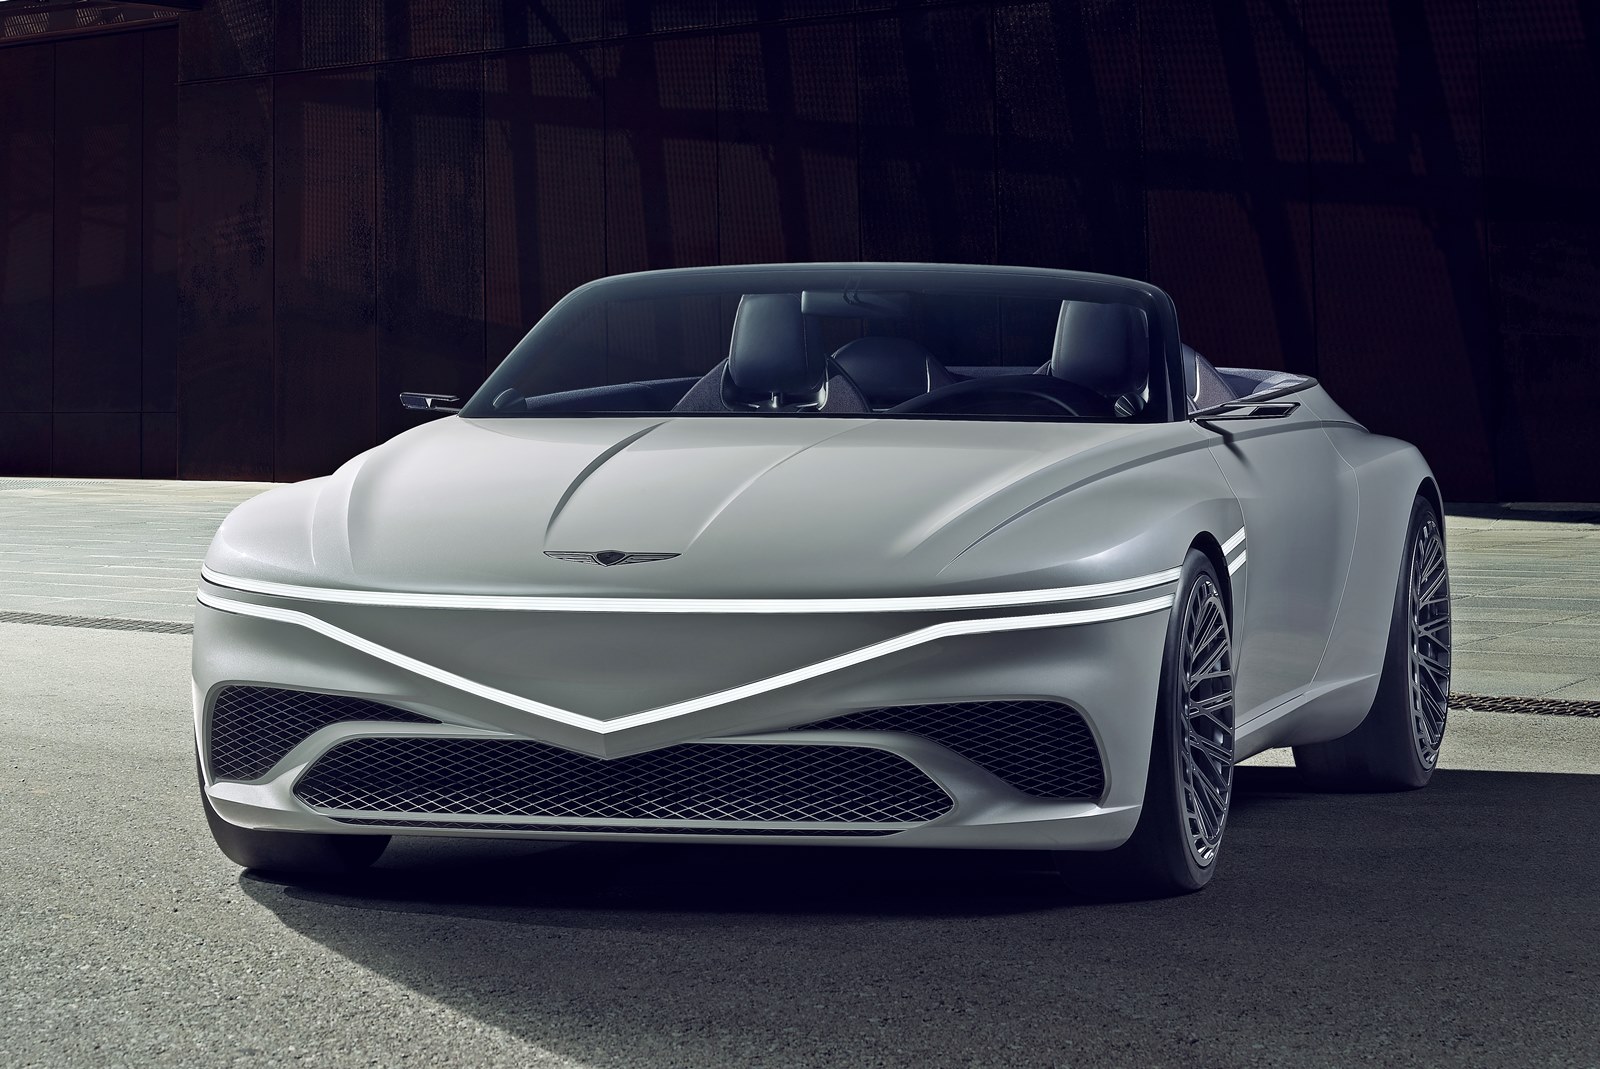 genesis x convertible almost ready for production & it looks amazing!